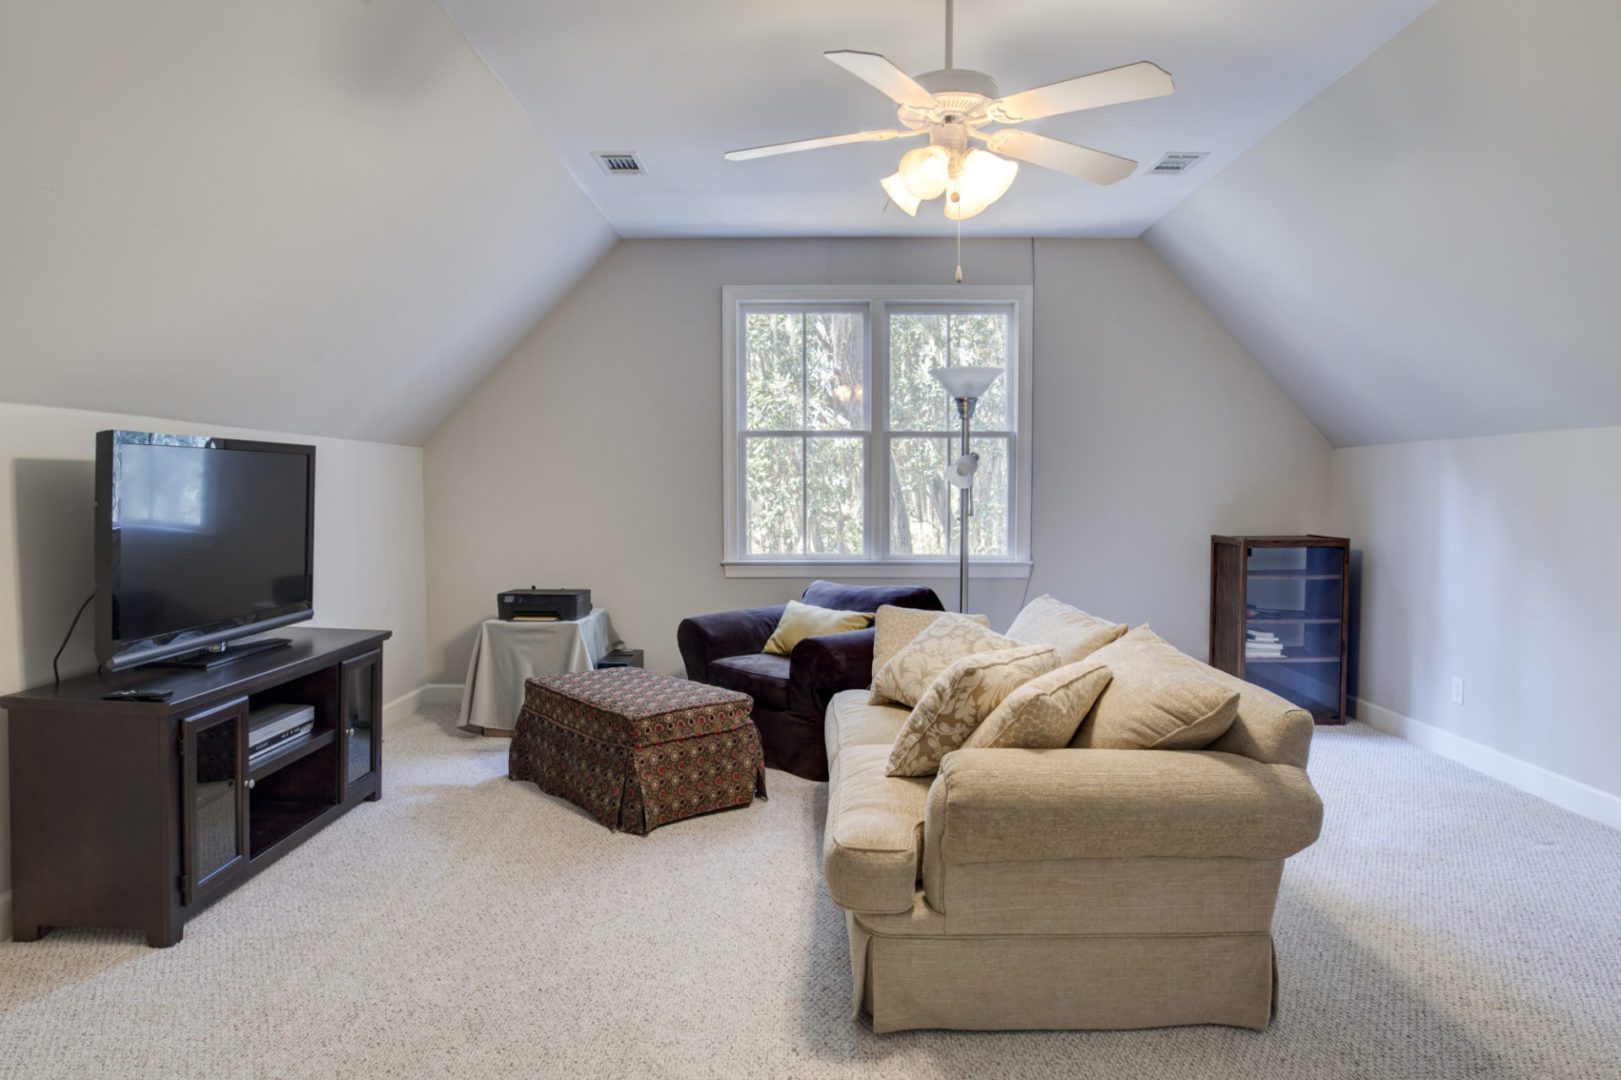 Attic man cave with tv, man cave, home addition, home, man cave décor, man cave decorating ideas